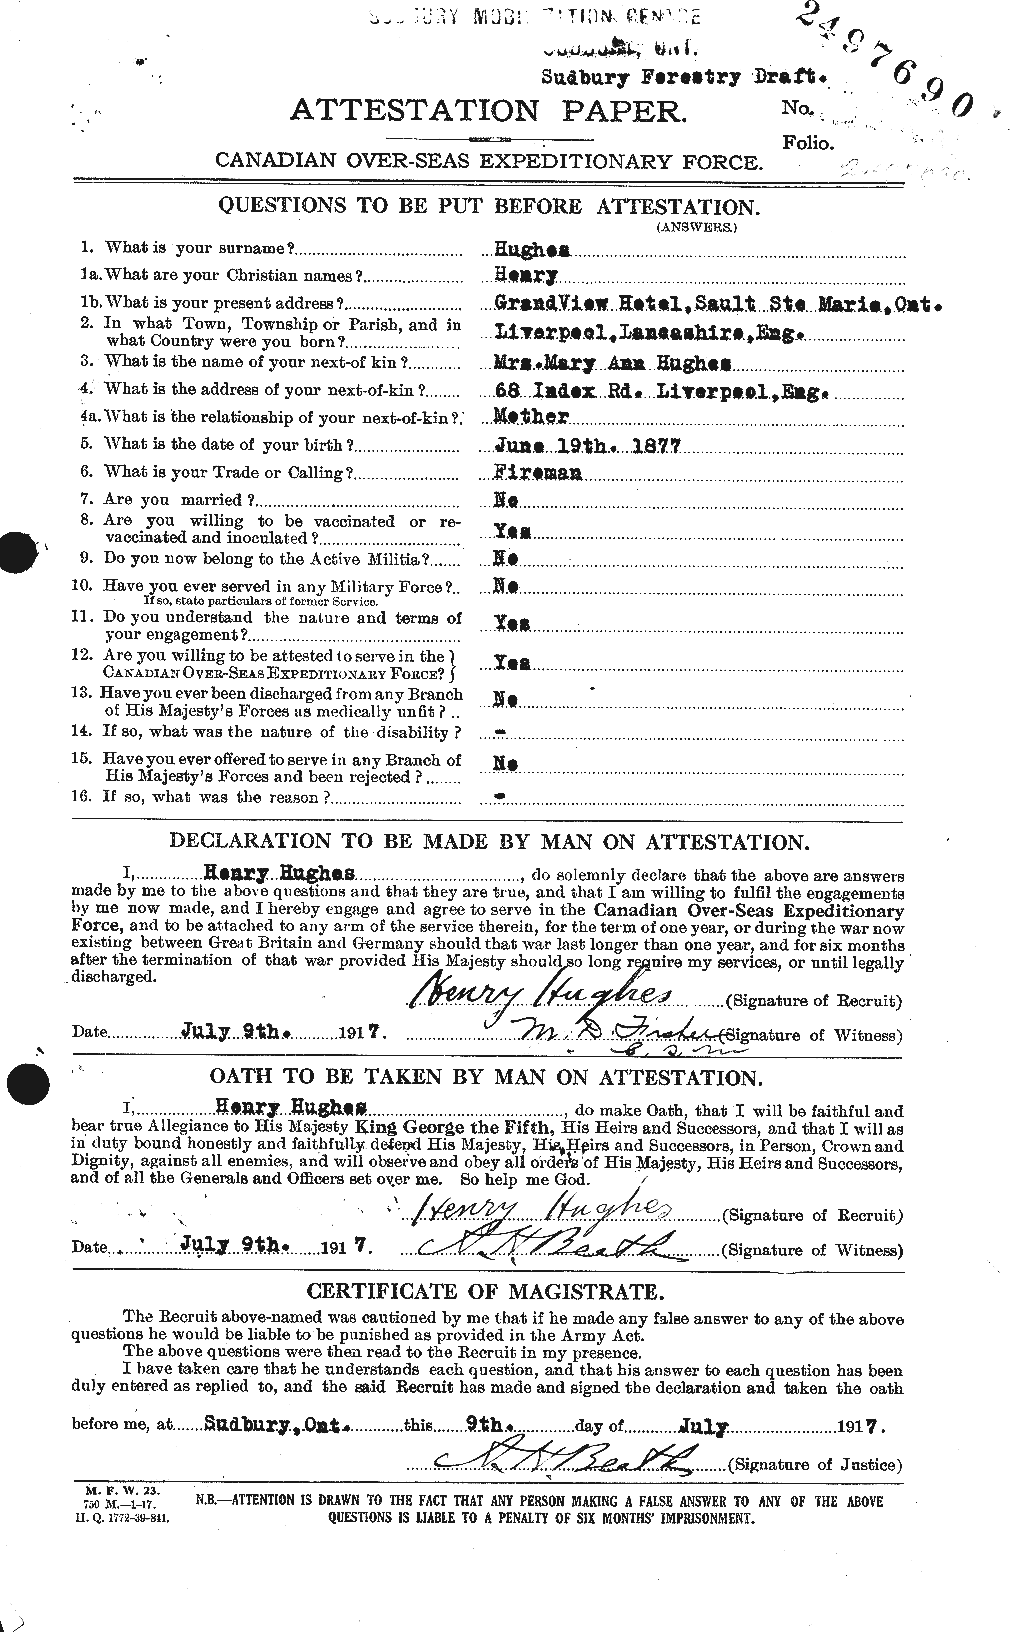 Personnel Records of the First World War - CEF 403881a